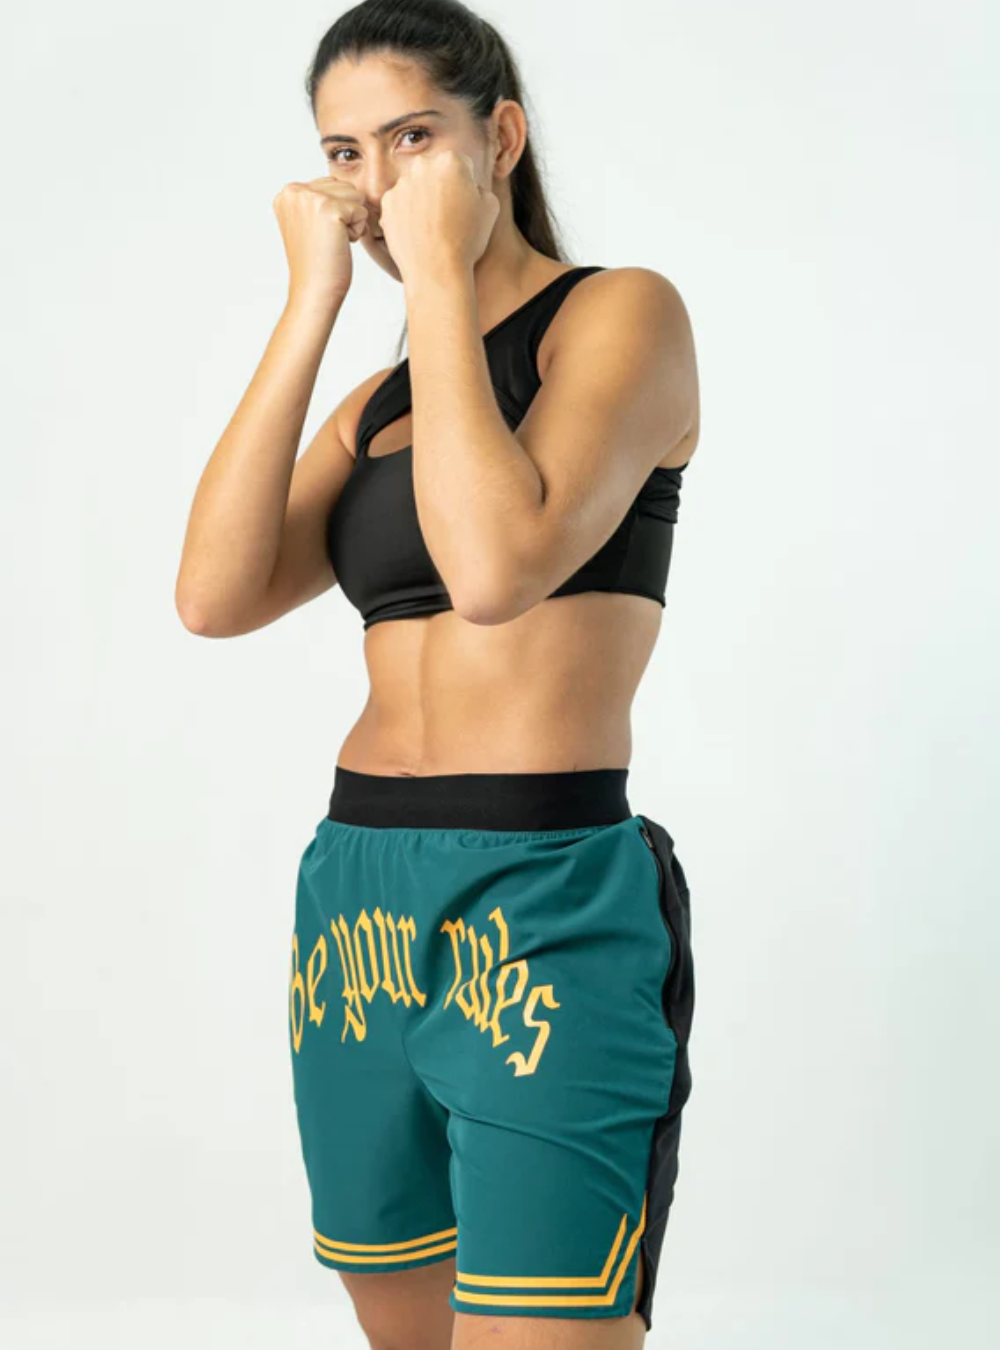 SHORTS VERDE VERDE UNISEX 'BE YOUR RULES'